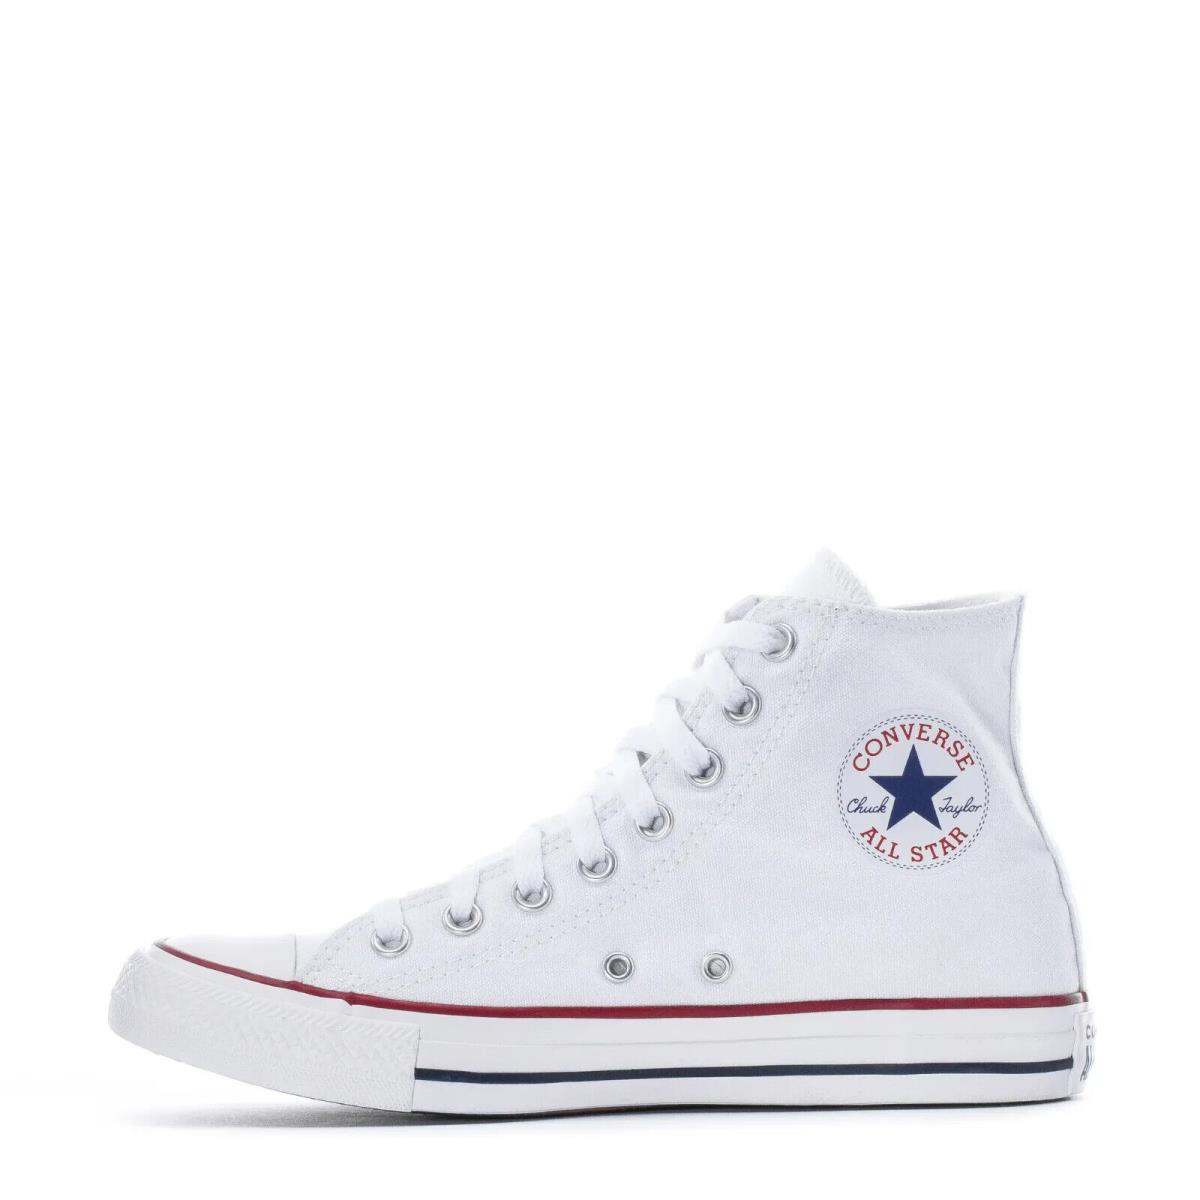 Converse Chuck Taylor HI Core White Red HI Top Casual Athletic Sneakers